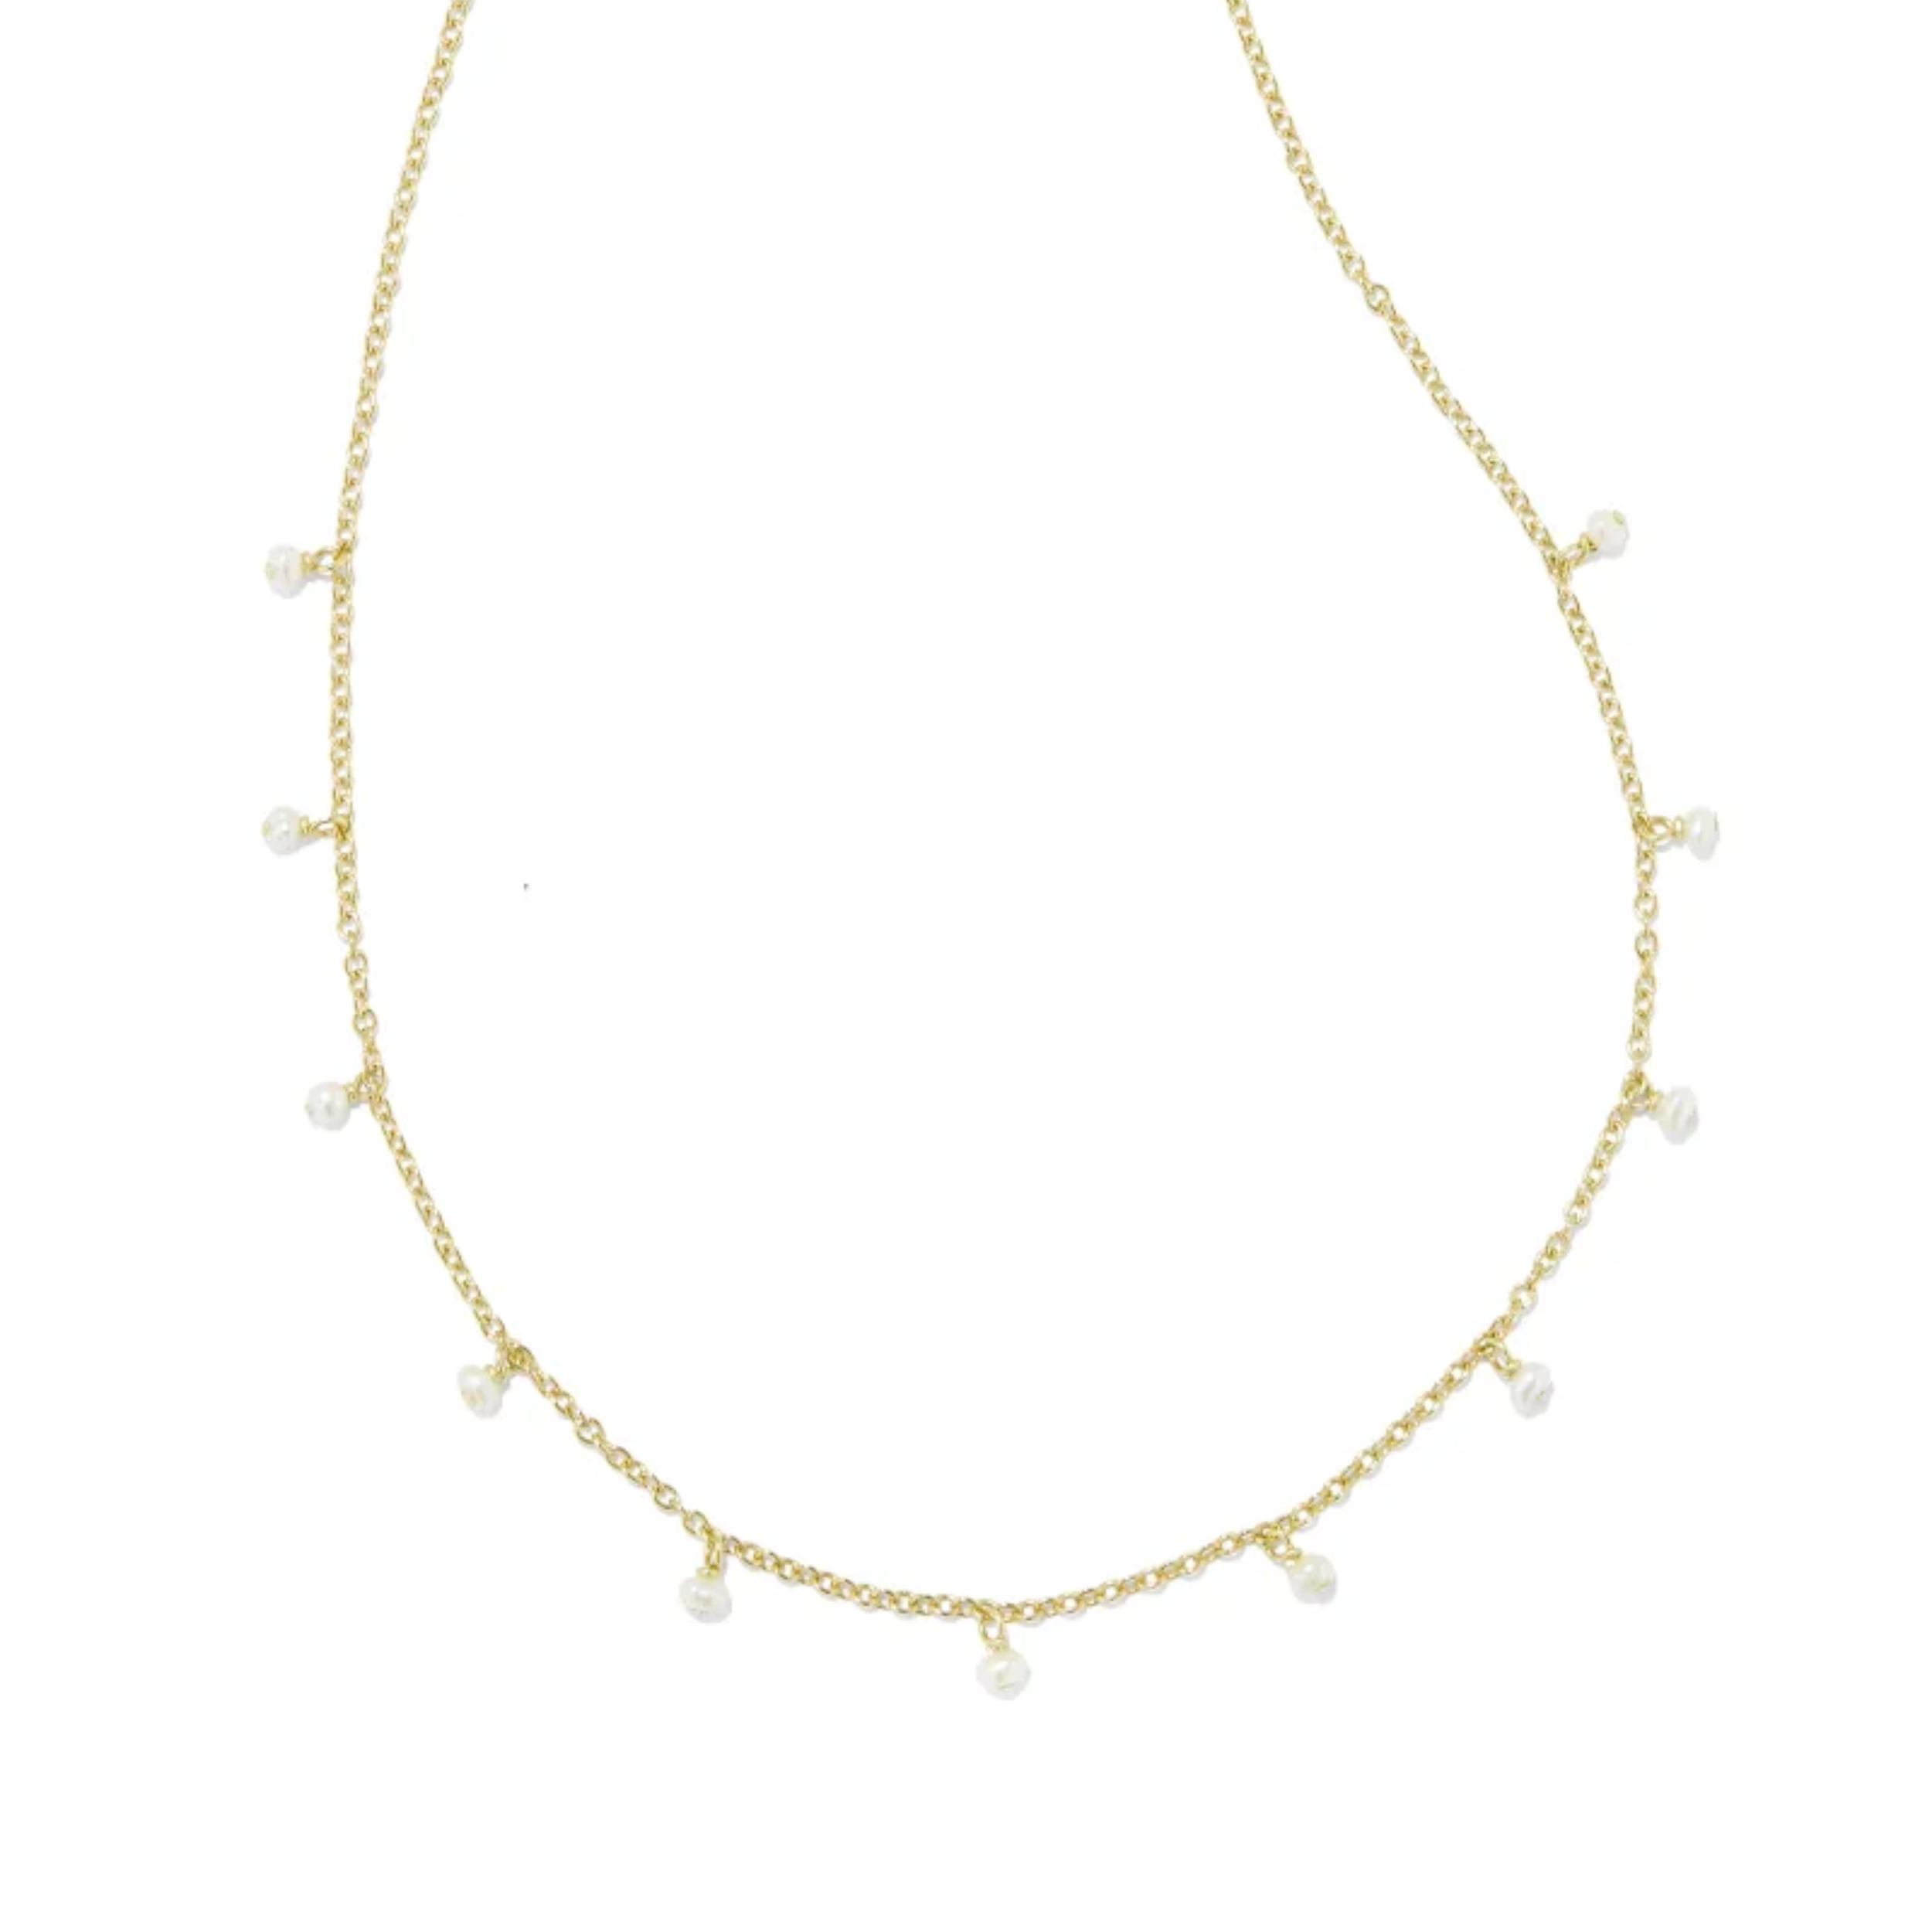 This Willa Gold Pearl Strand Necklace in White Peaarl by Kendra Scott is pictured on a white background.